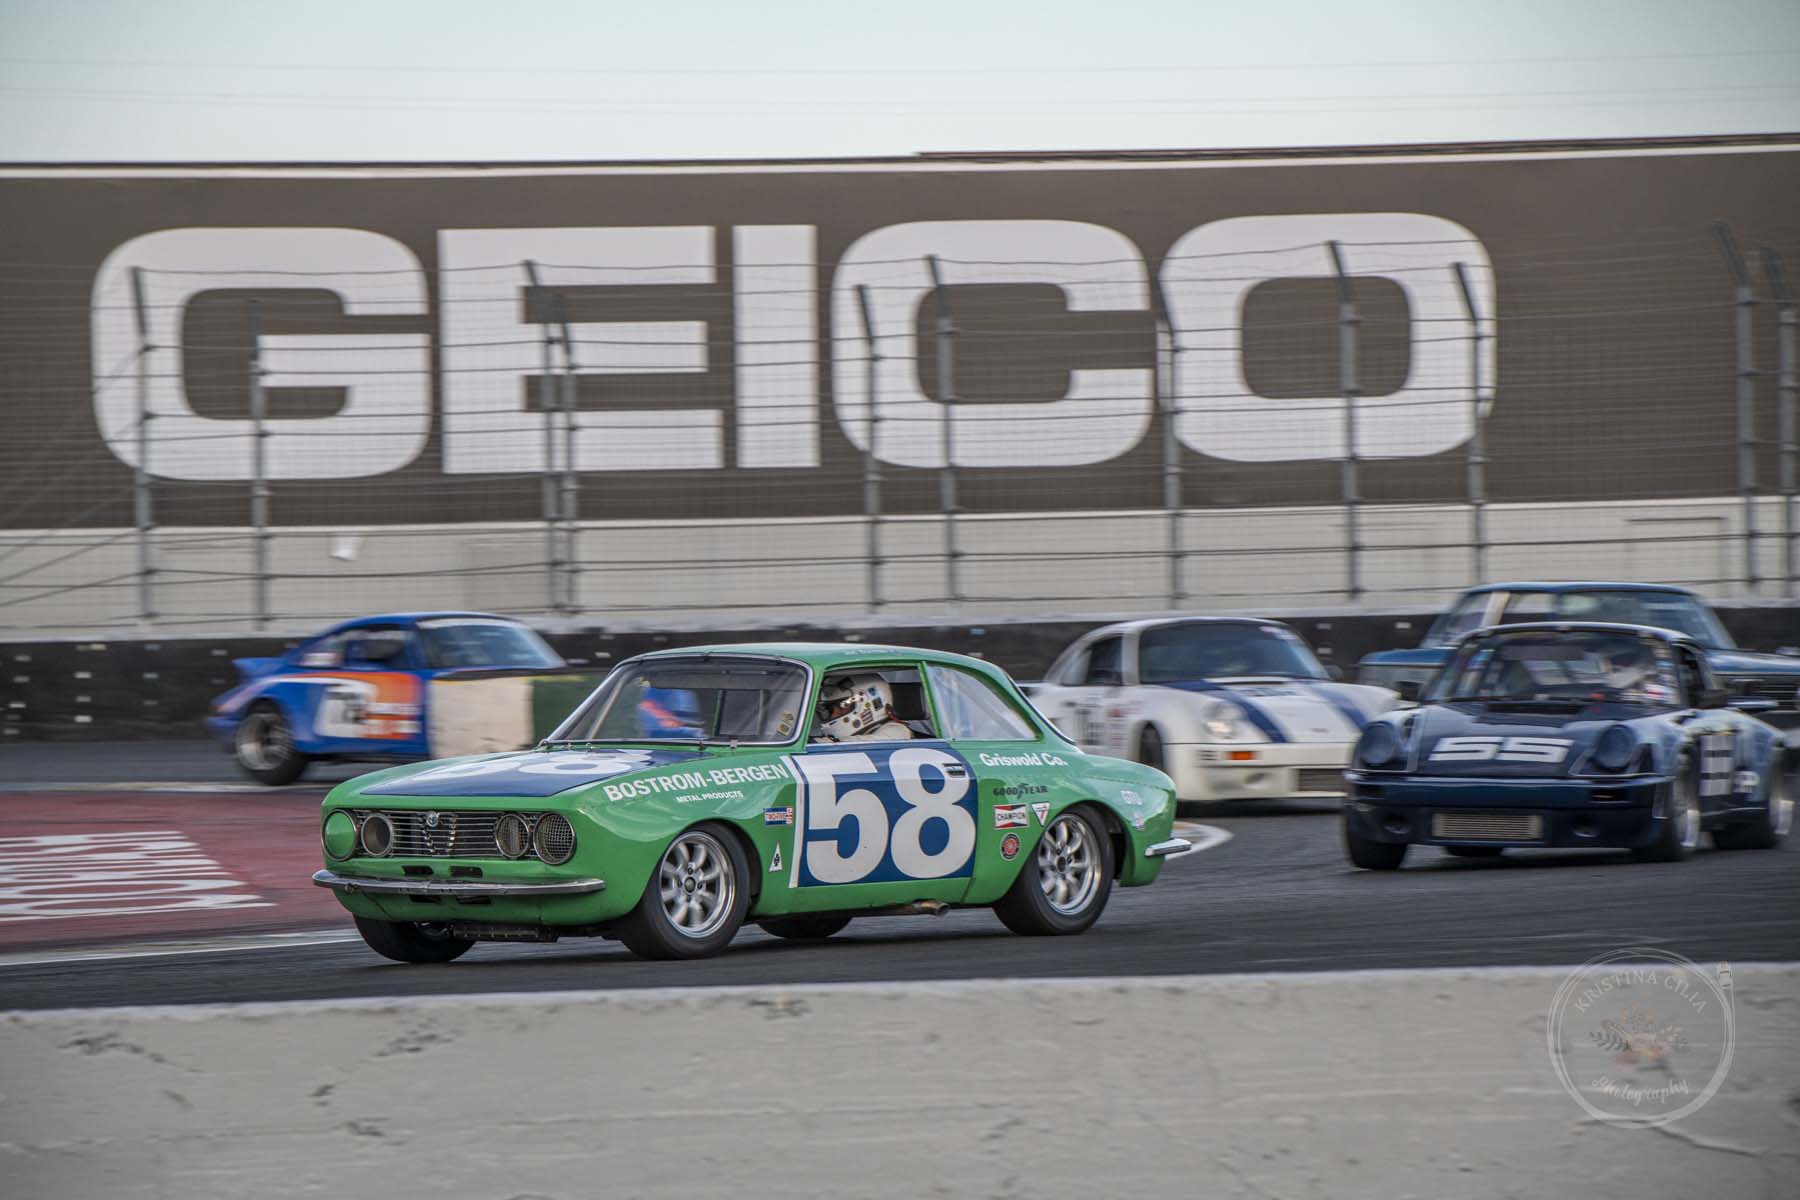 William Taylor, in a 1971 Alfa Romeo GTV,  leads the Group 6 pack out of Turn 11 at Sonoma Raceway during Velocity Invitational